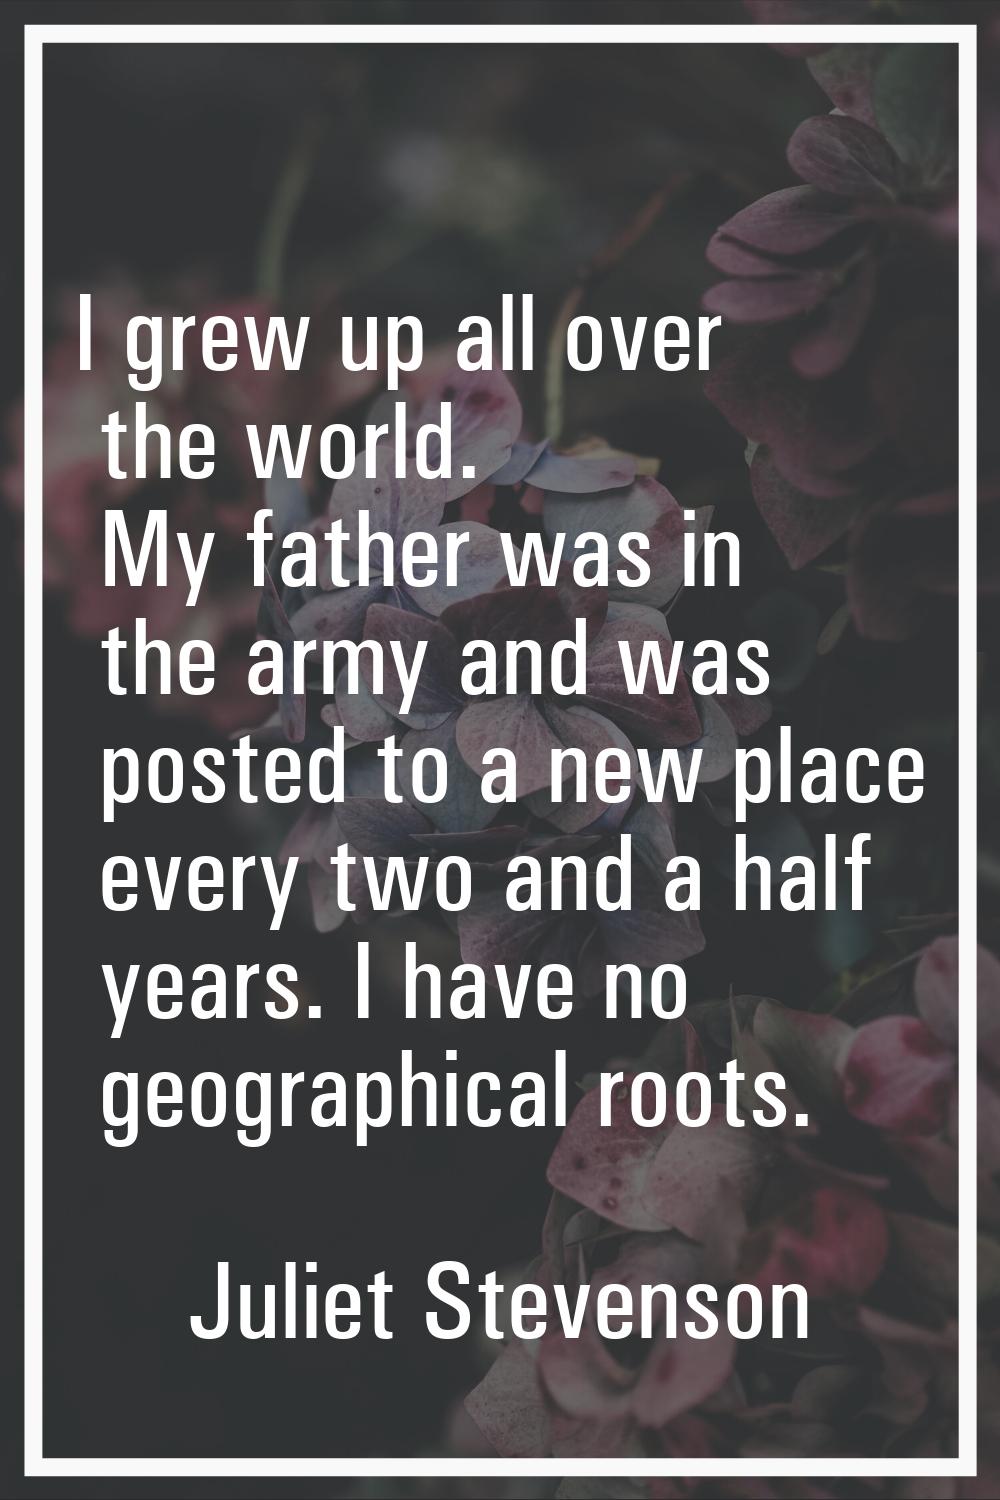 I grew up all over the world. My father was in the army and was posted to a new place every two and